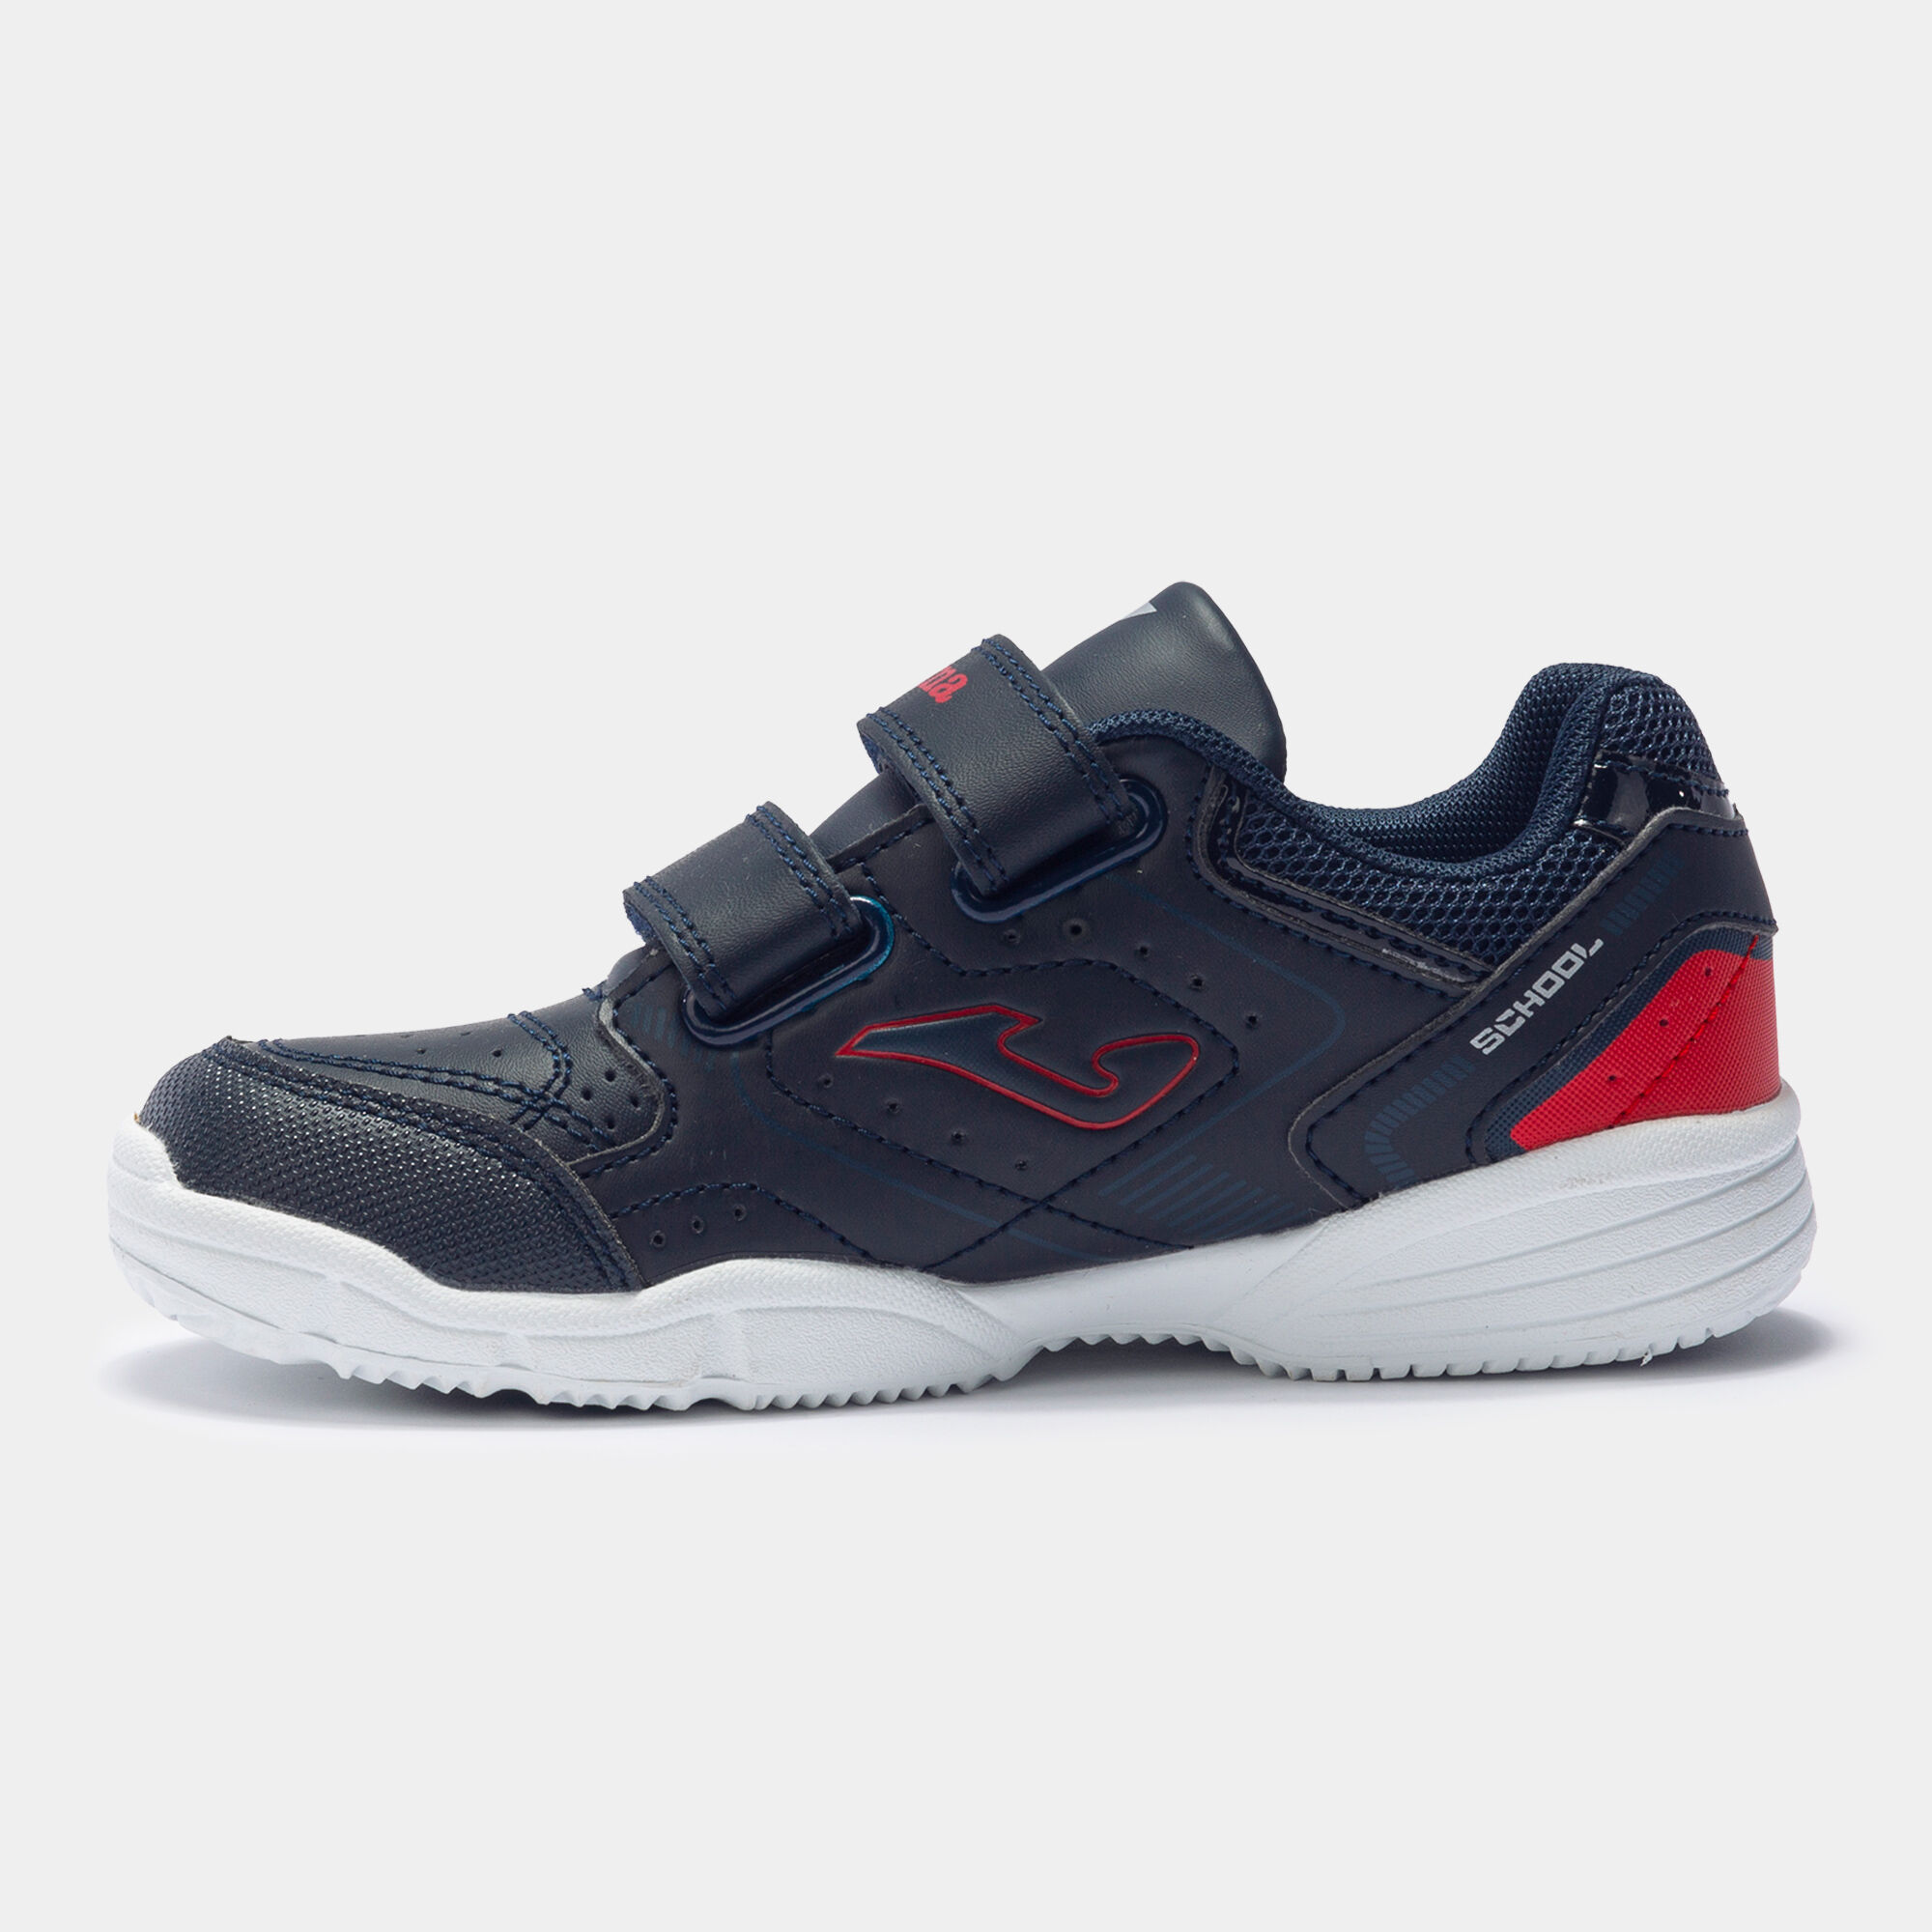 CASUAL SHOES SCHOOL 22 JUNIOR NAVY BLUE RED